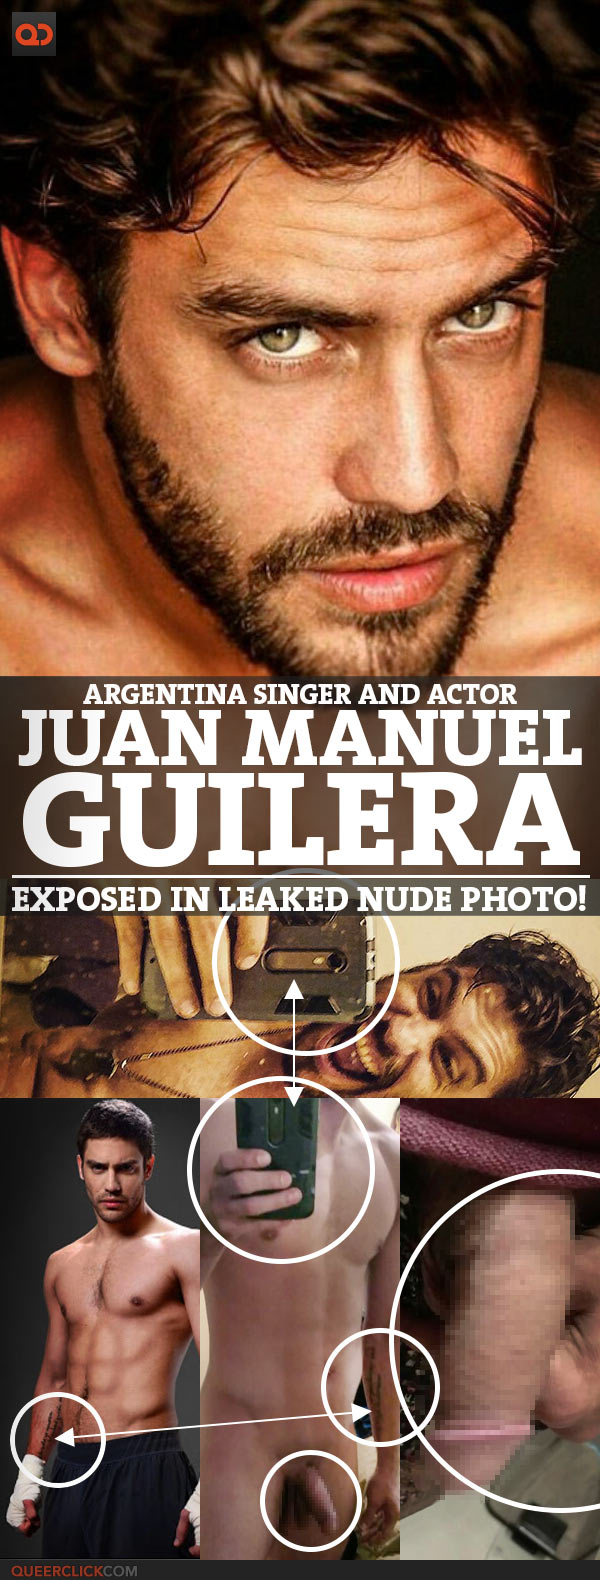 Juan Manuel Guilera, Argentina Singer And Actor, Exposed In Leaked Nude Photo!